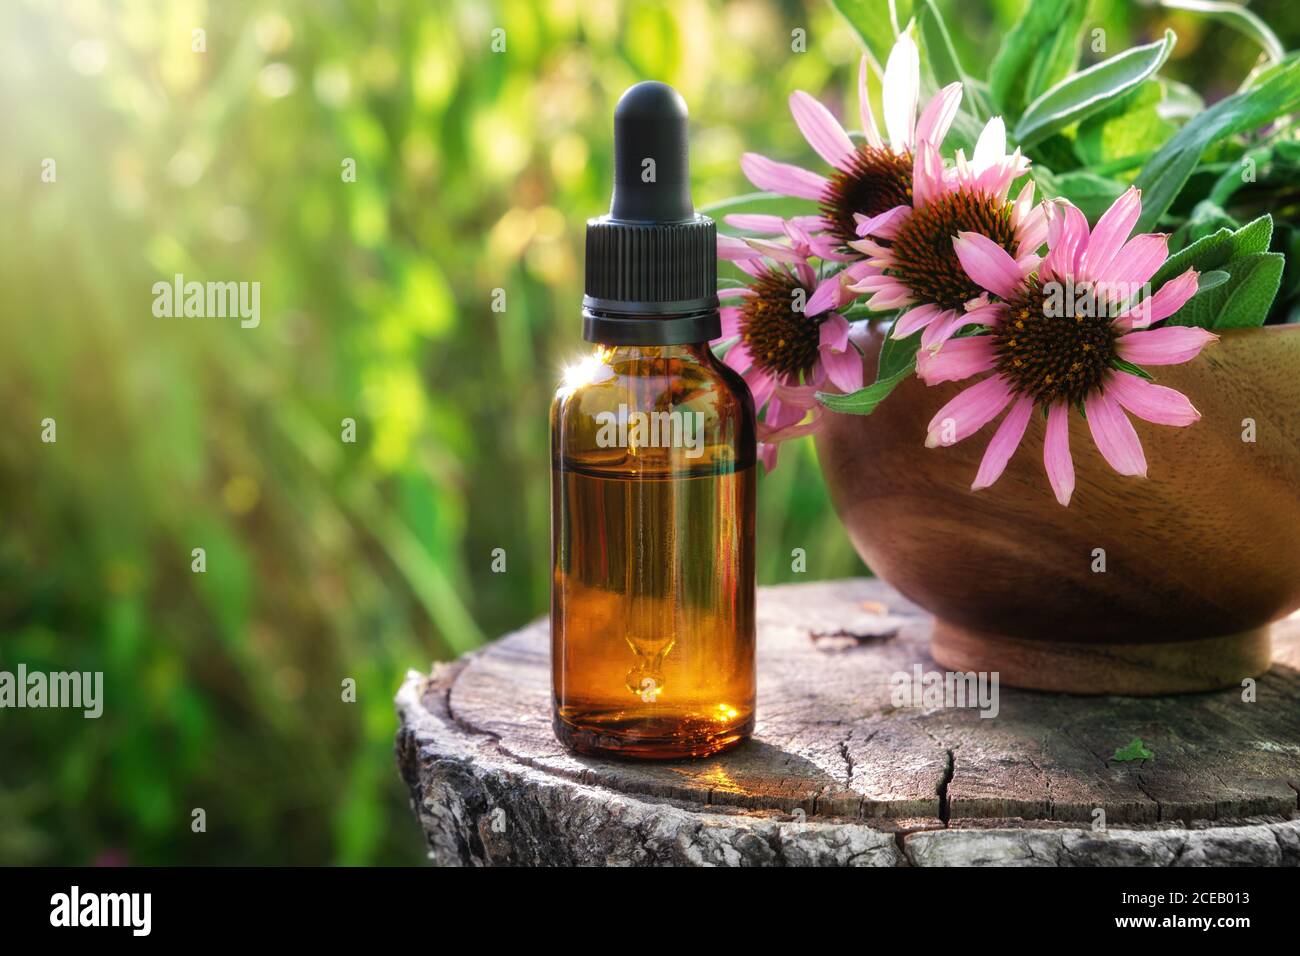 Dropper bottle of echinacea essential oil or tincture, wooden mortar of coneflowers outdoors. Alternative medicine Stock Photo